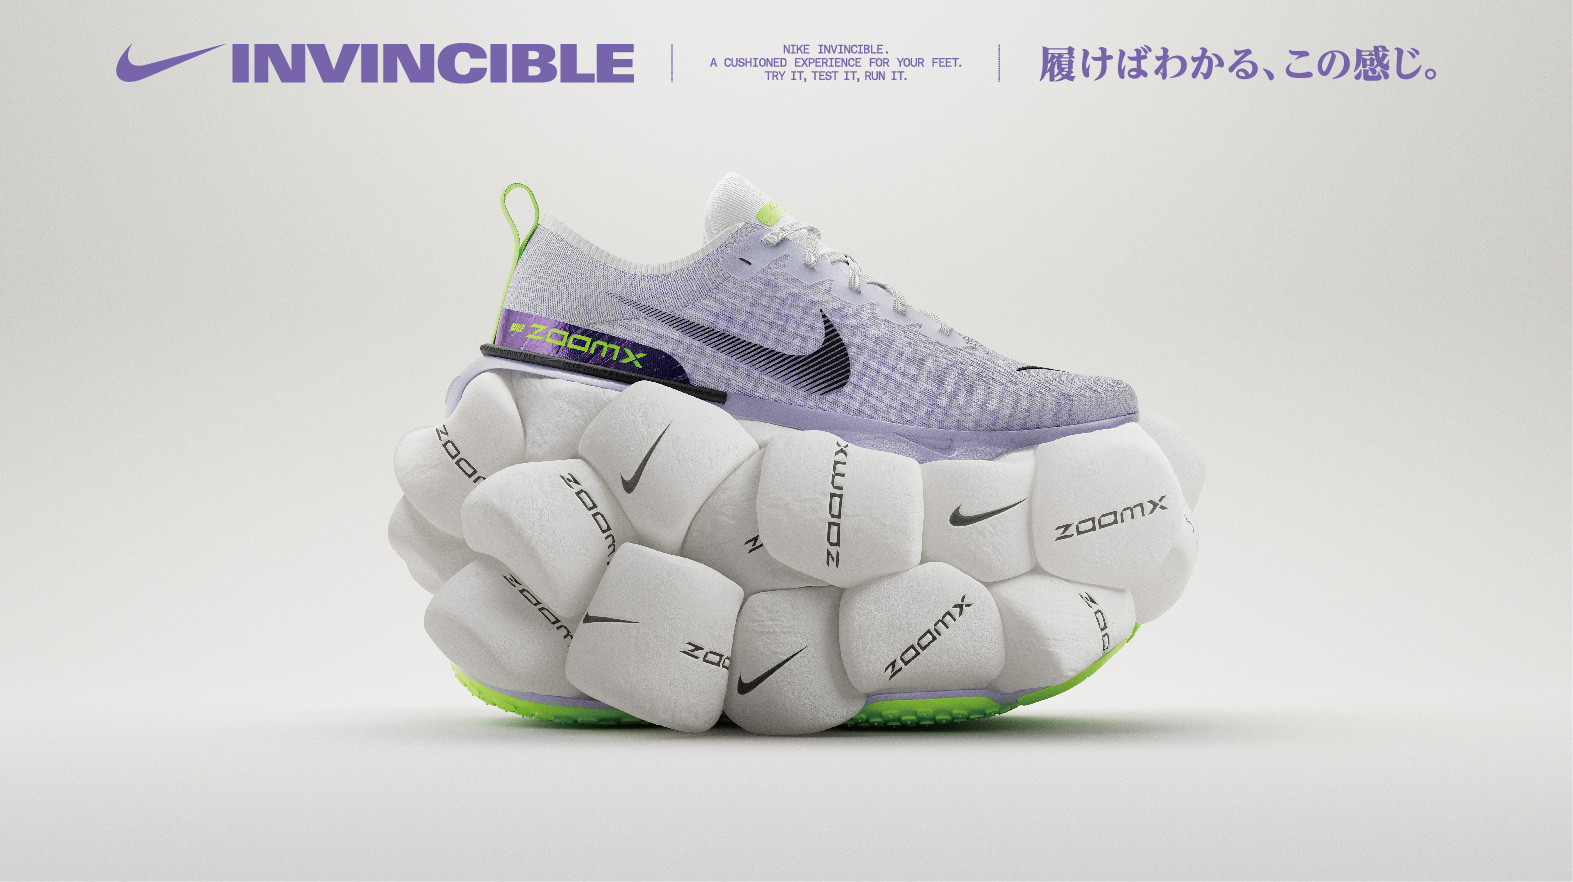 Nike Invincible 3 Review 2023: Plush Everyday Trainers for Less